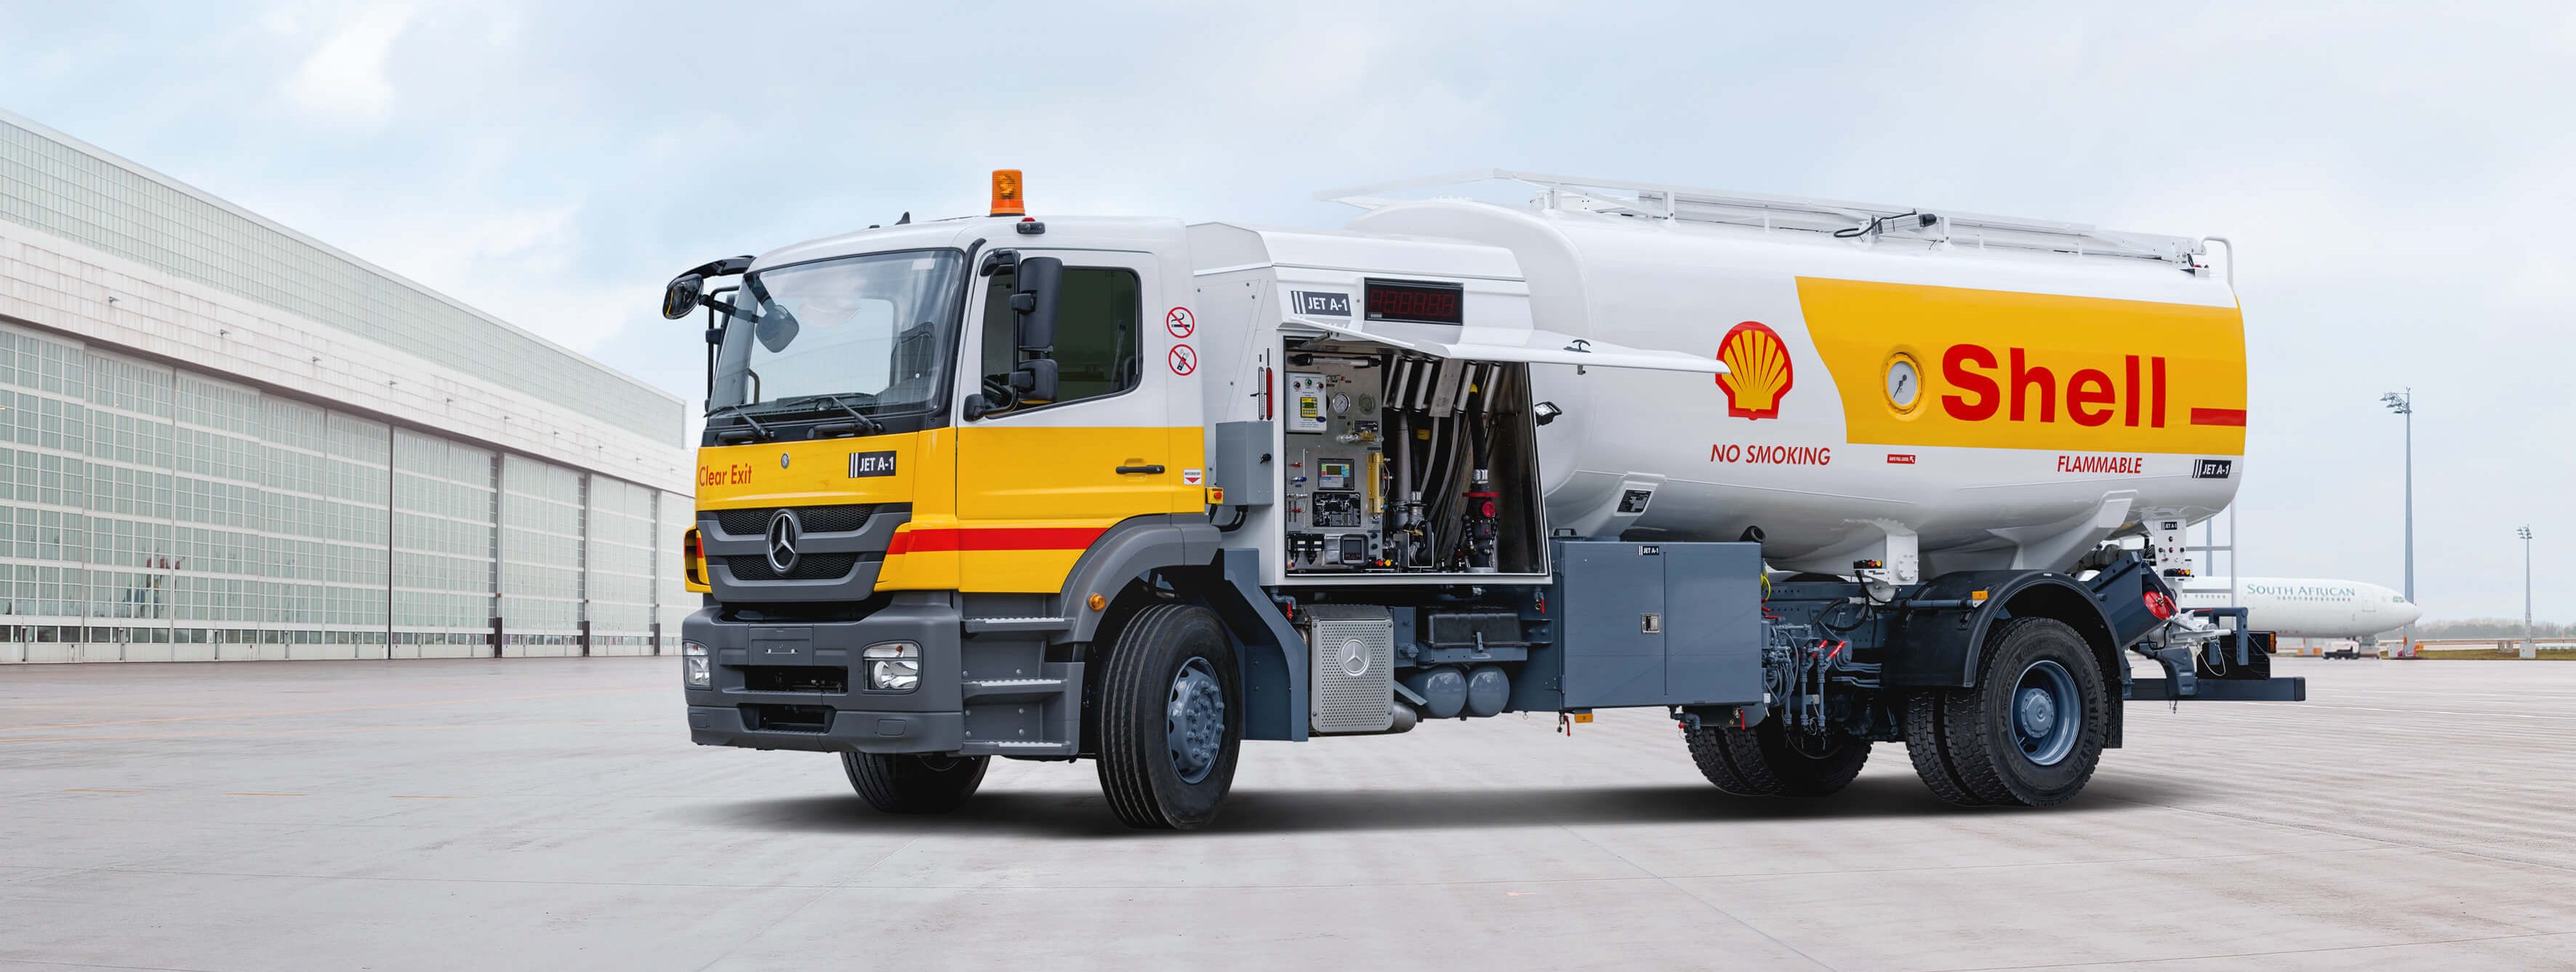 Shell Aviation introduces industry-first electric pump jet refueller